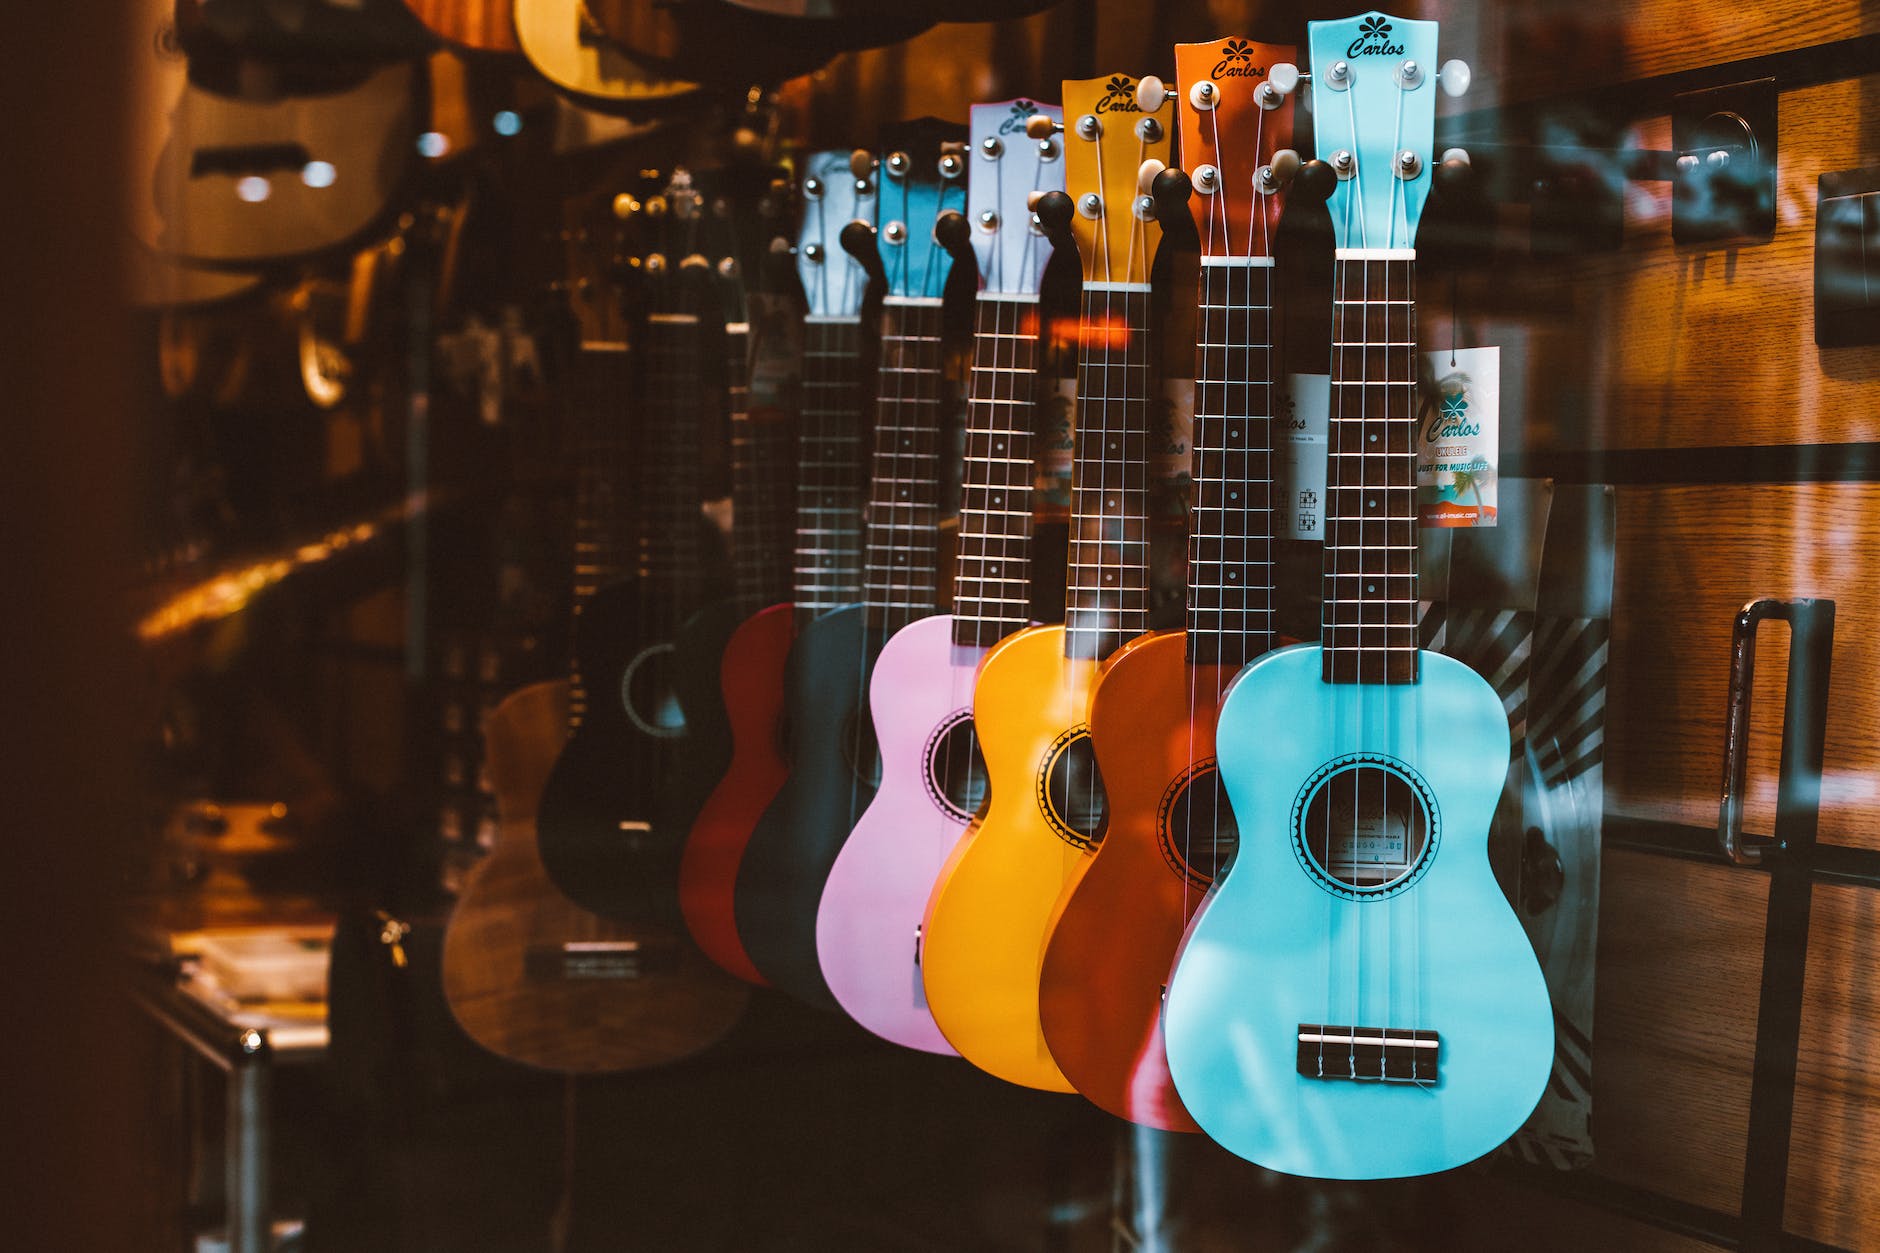 colorful guitars hanging behind the glass window